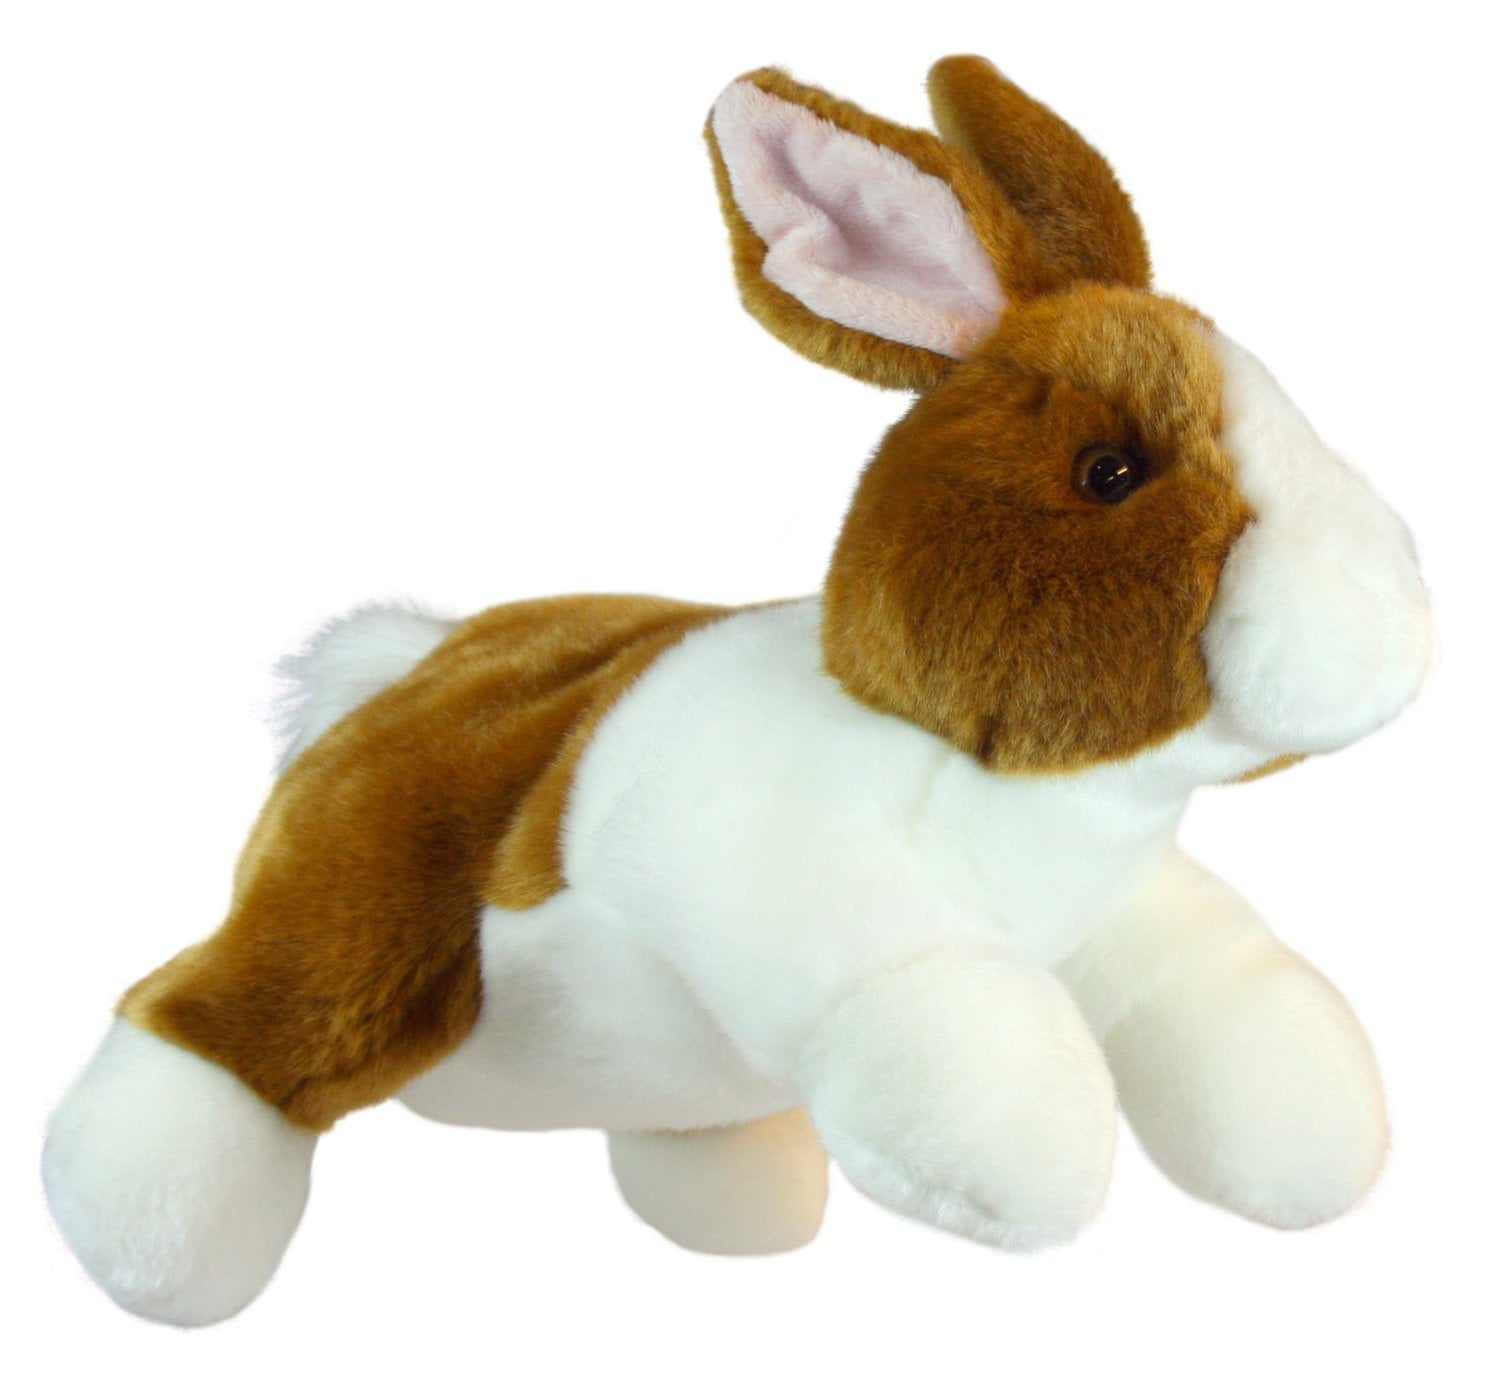 Hand Puppet - Full-Bodied Animal - Rabbit (Brown & White) Soft Doll ...